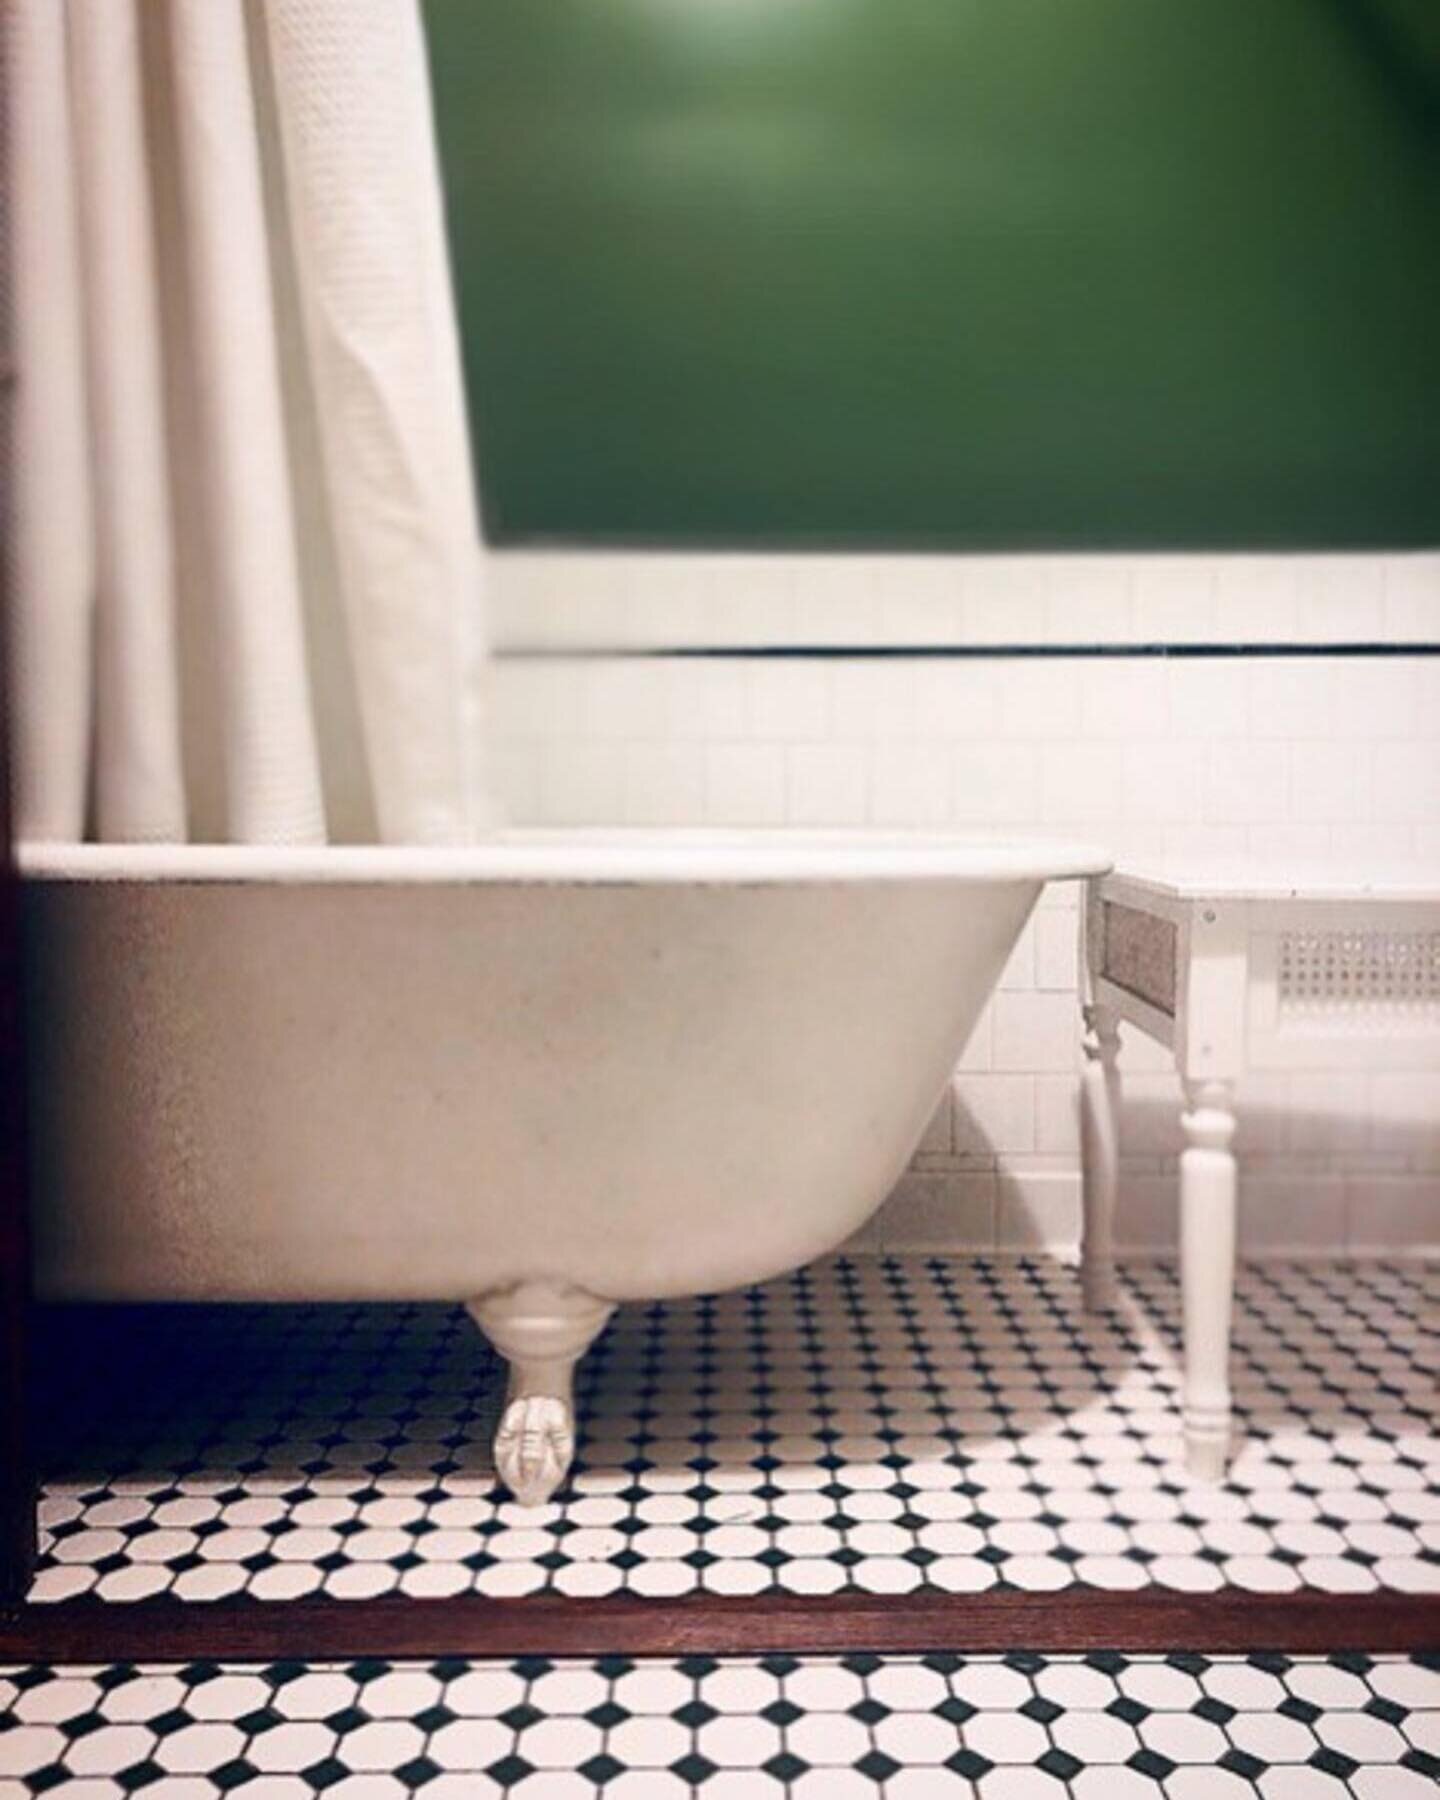 Our guests LOVE having claw foot tubs. Soak in these historic tubs after a full days adventure.